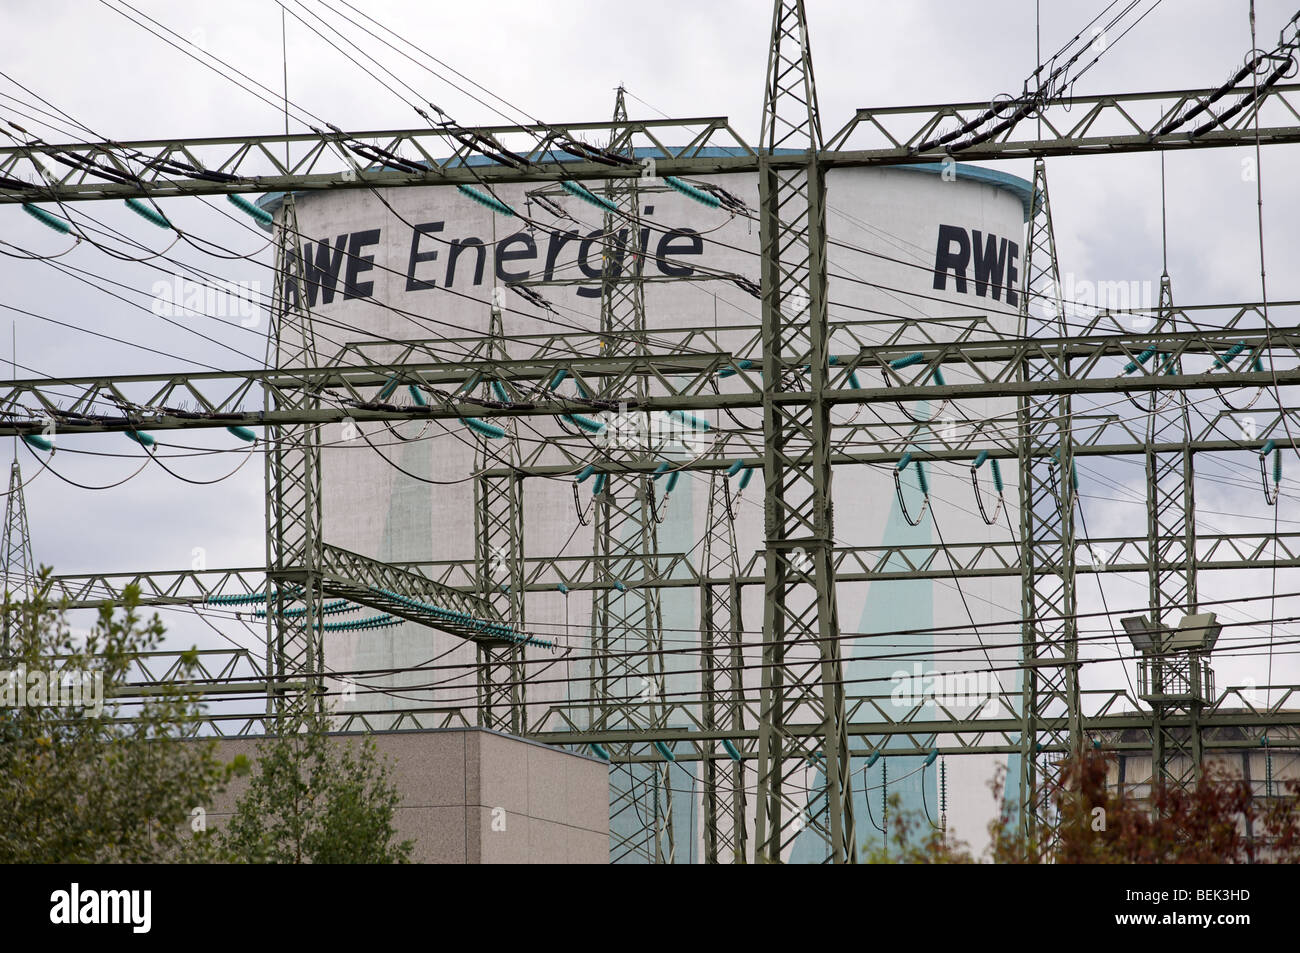 RWE Energy gas-fired power station, Germany. Stock Photo